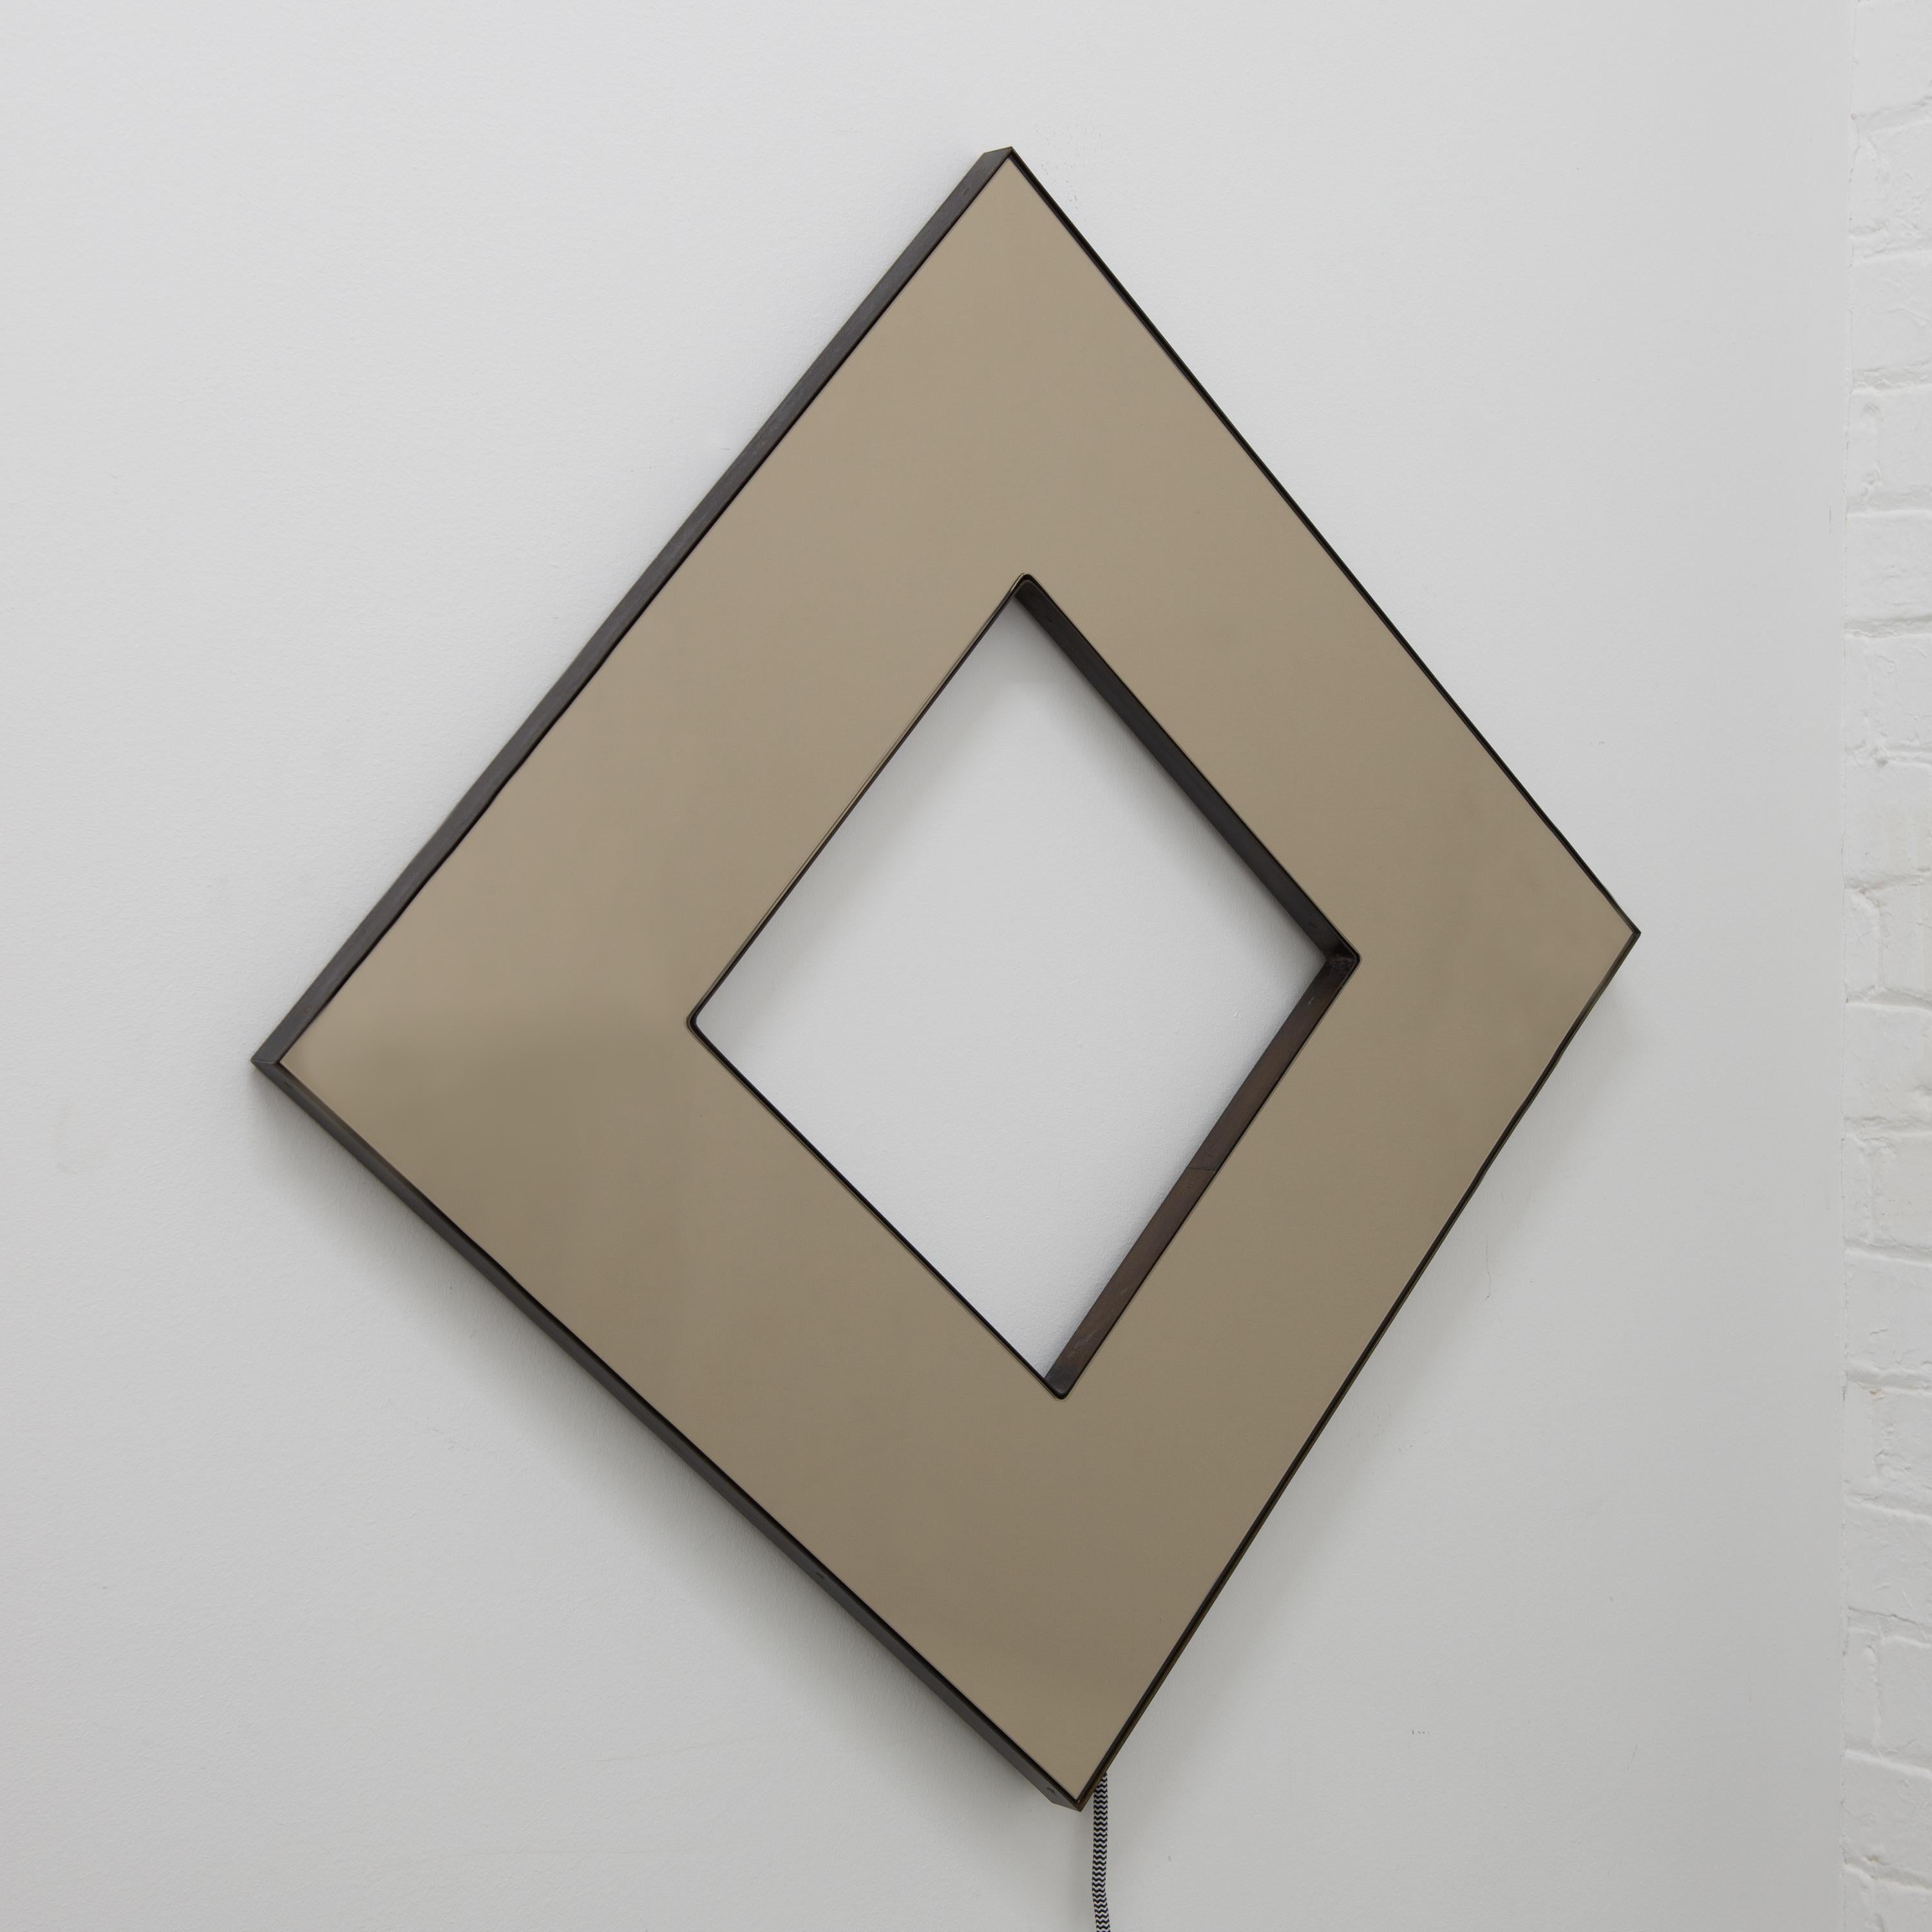 Donut Square Bronze Tinted Back Illuminated Contemporary Mirror, Large In New Condition For Sale In London, GB